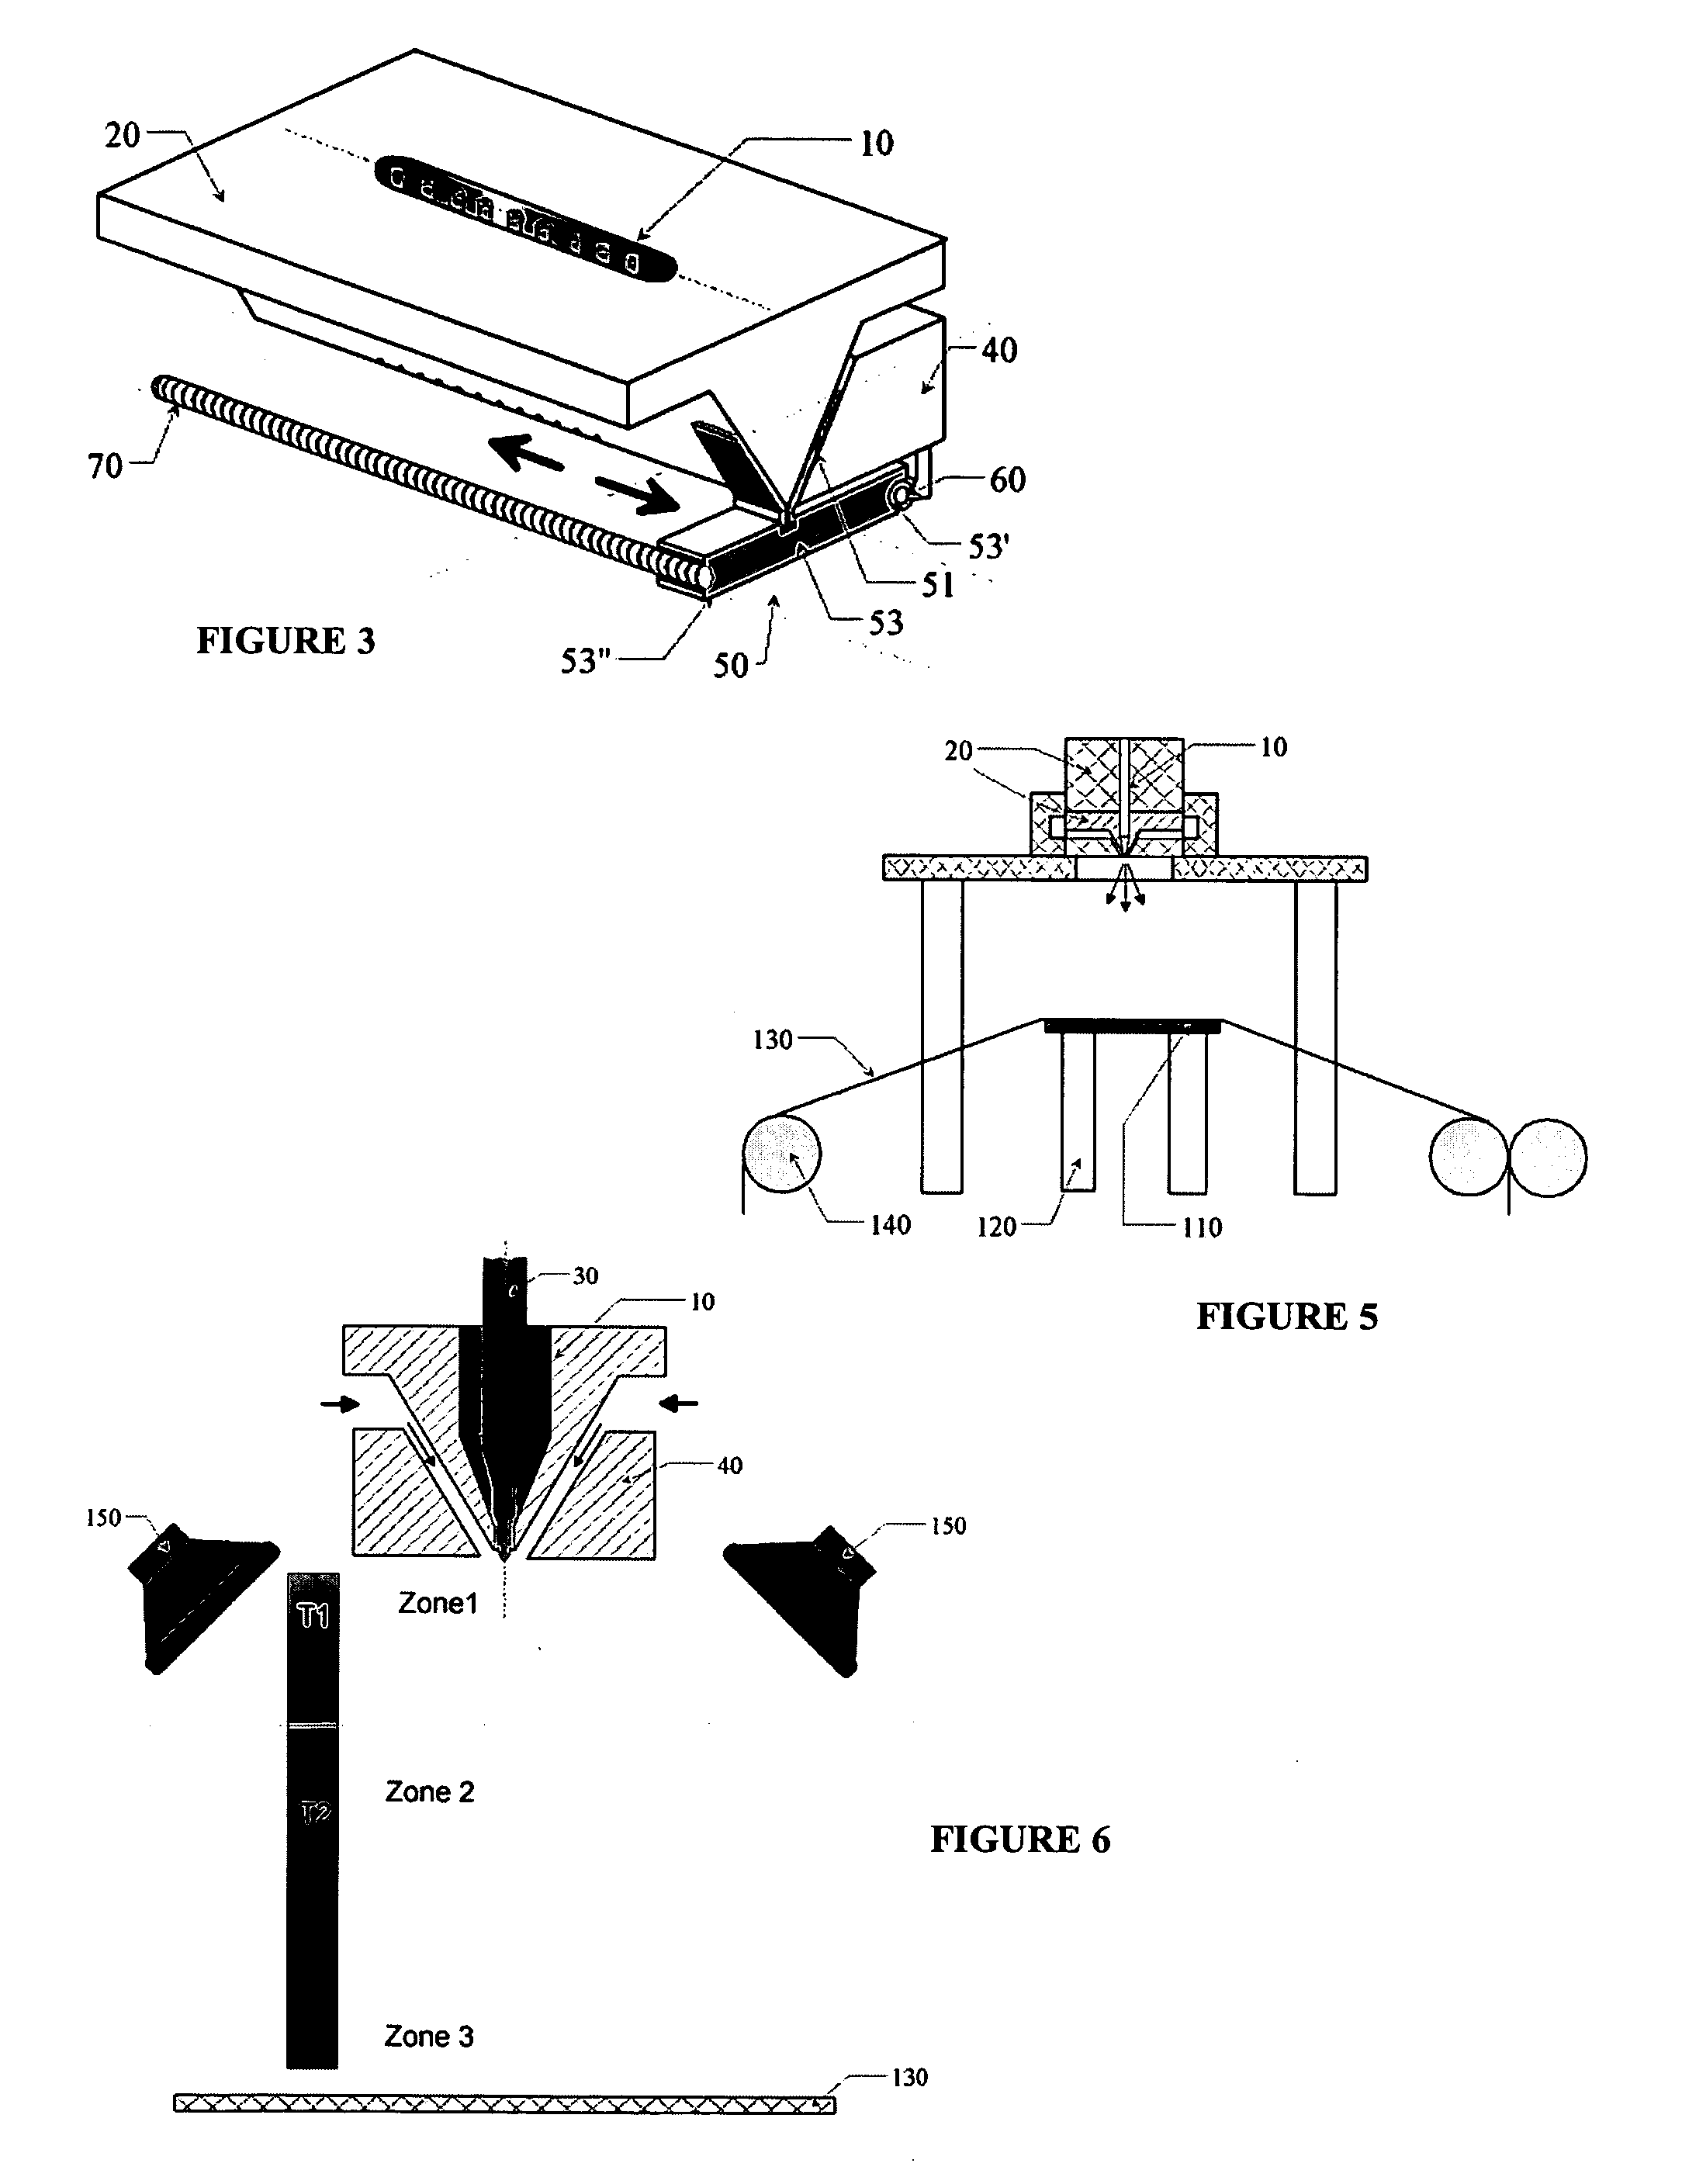 Apparatus for electro-blowing or blowing-assisted electro-spinning technology and process for post treatment of electrospun or electroblown membranes